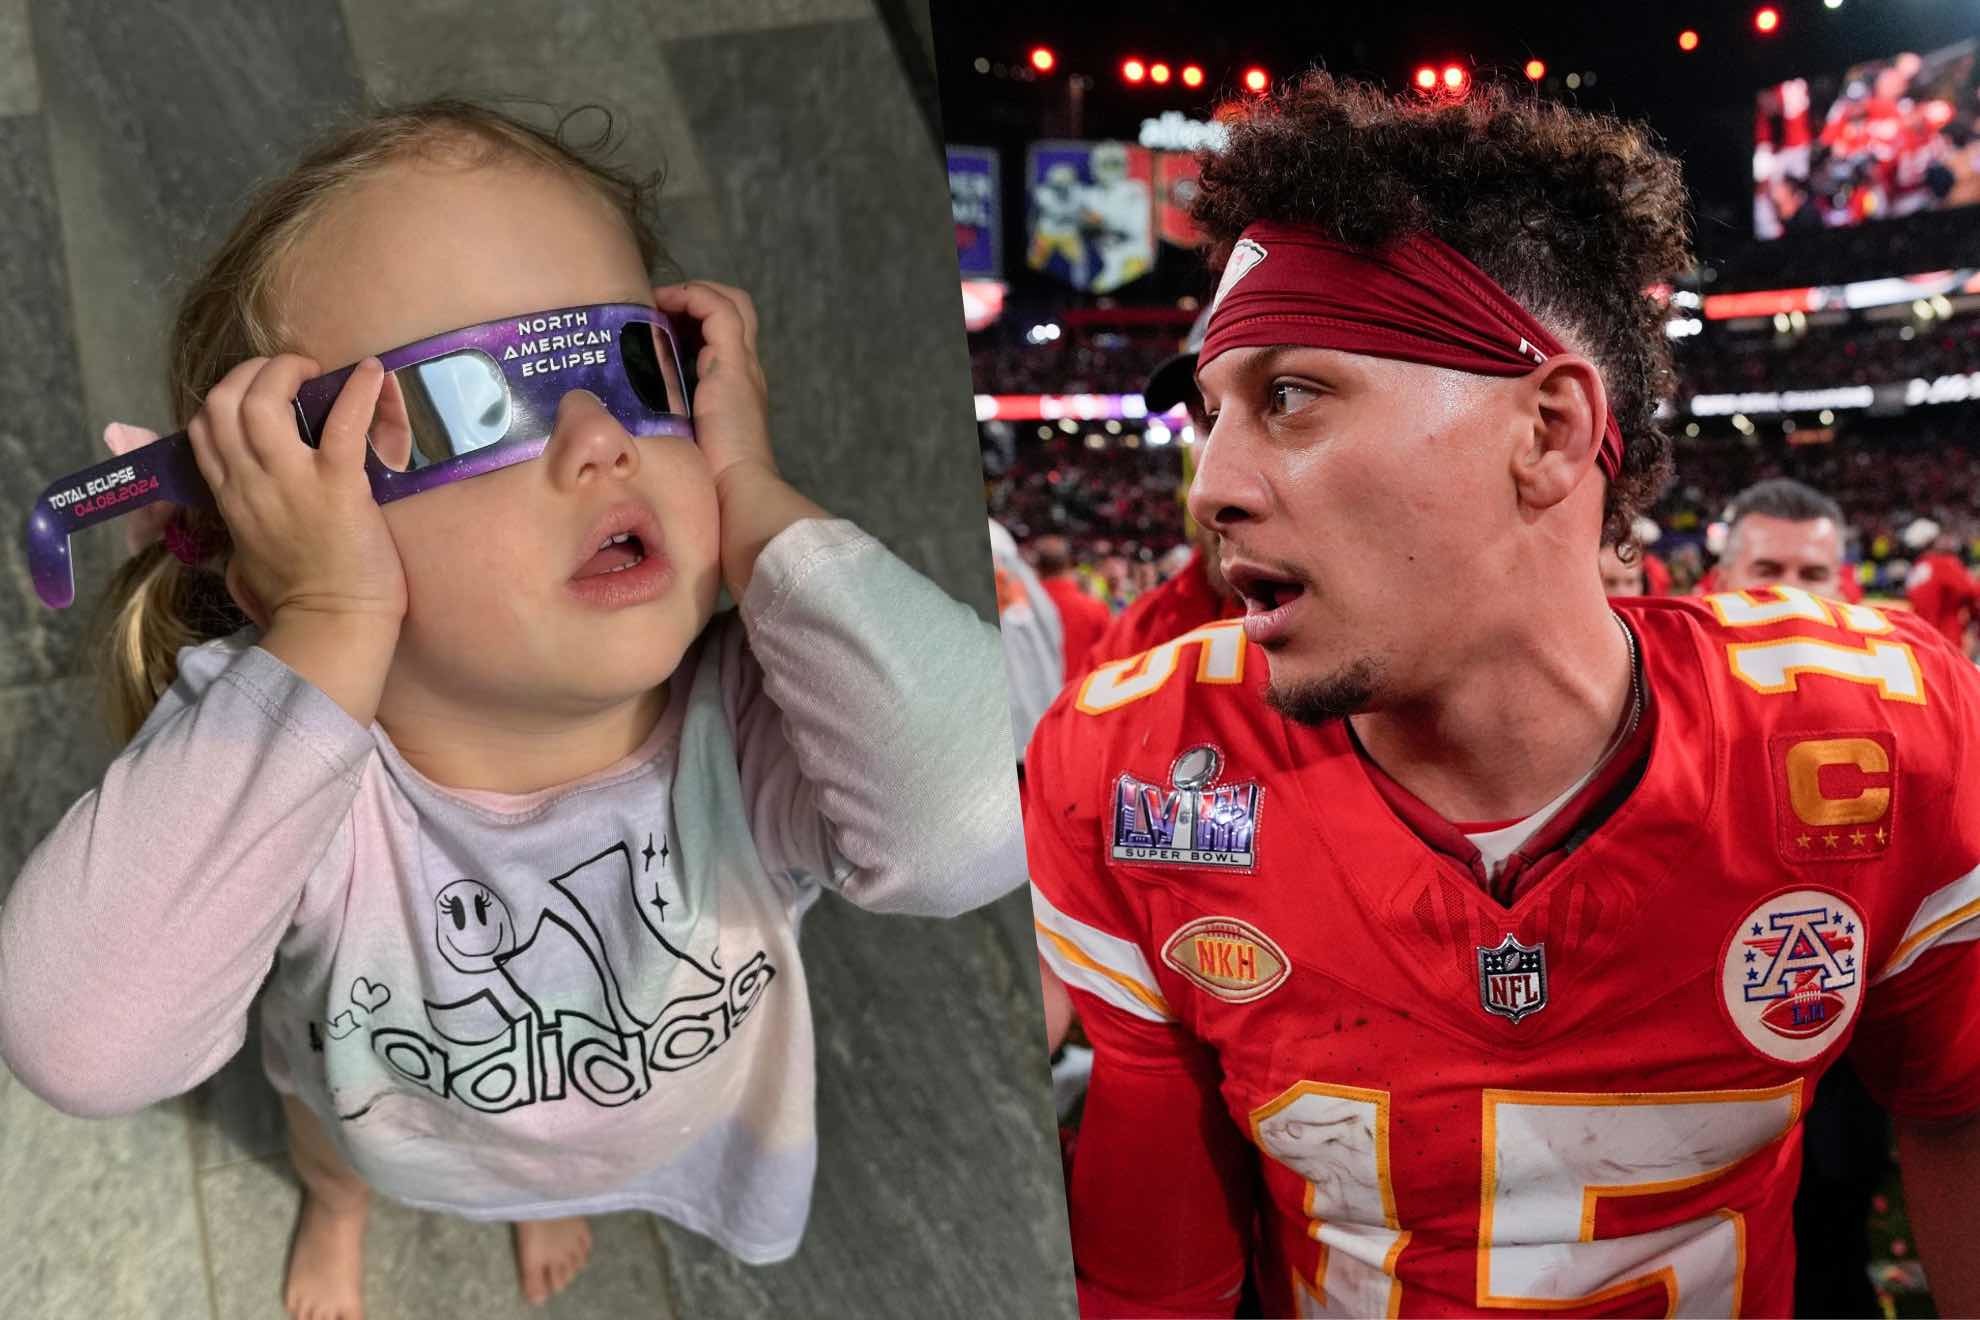 Patrick Mahomes came to the rescue of his daughter while they watched the solar eclipse